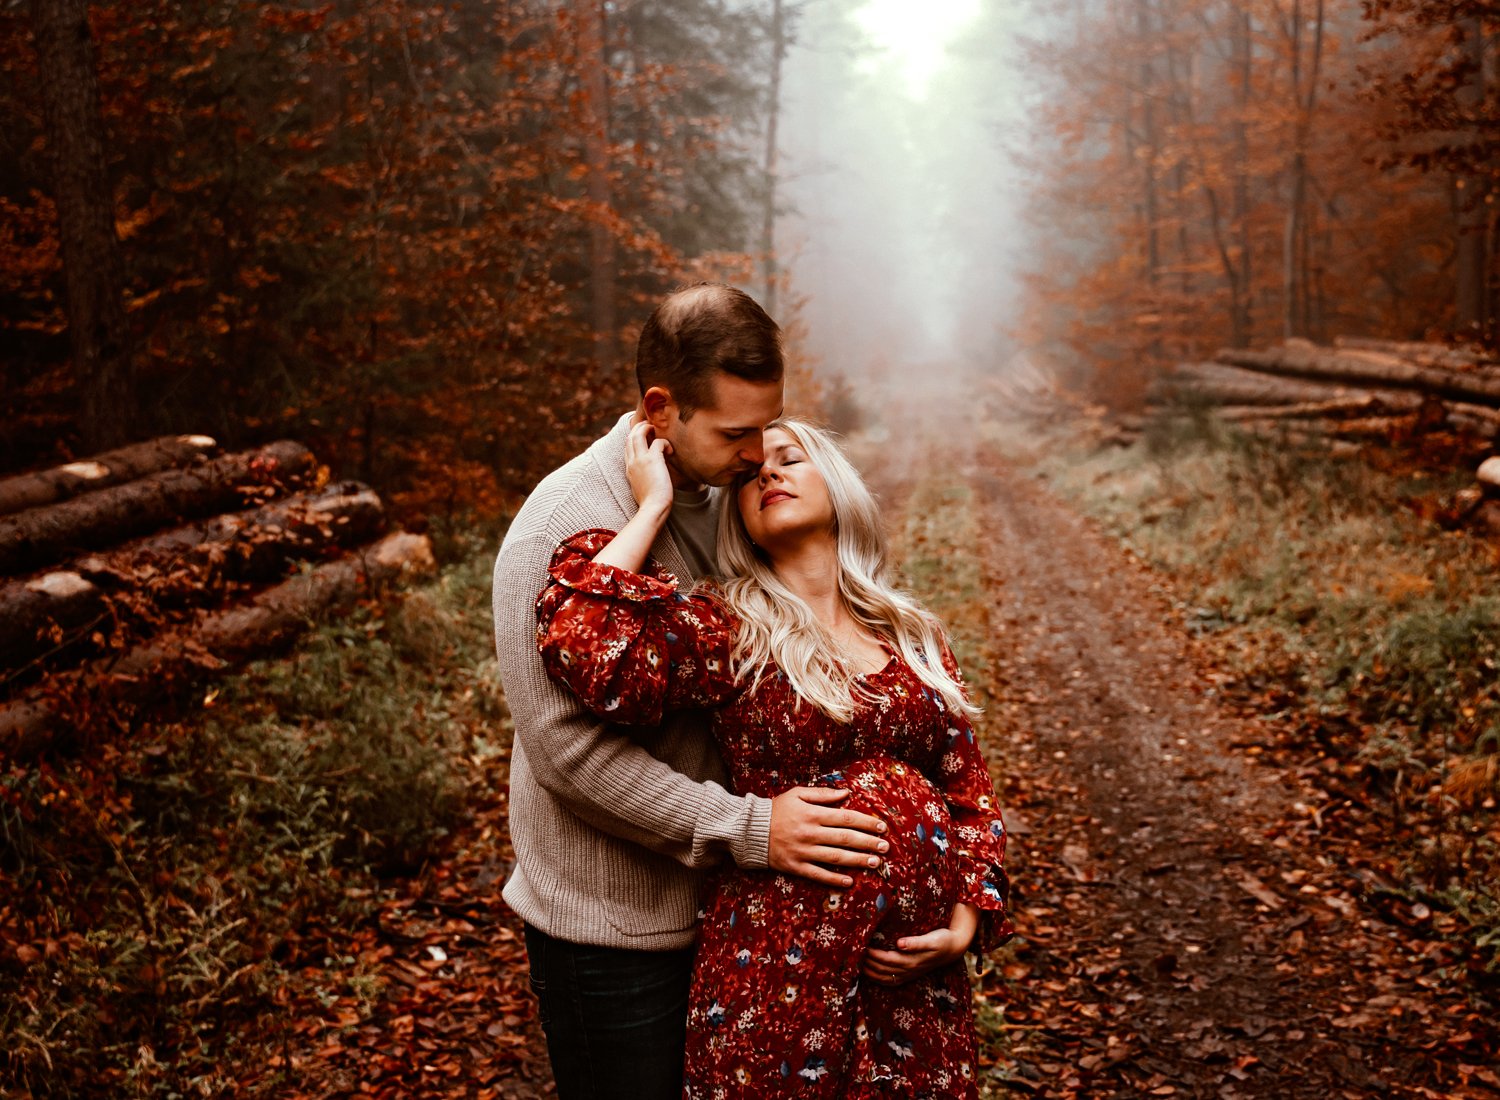 moody-maternity-couple-session-in-fall-season-in-wooded-forest-in-germany-by-motherhood-photographer-sarah-havens-ramtein (8).jpg